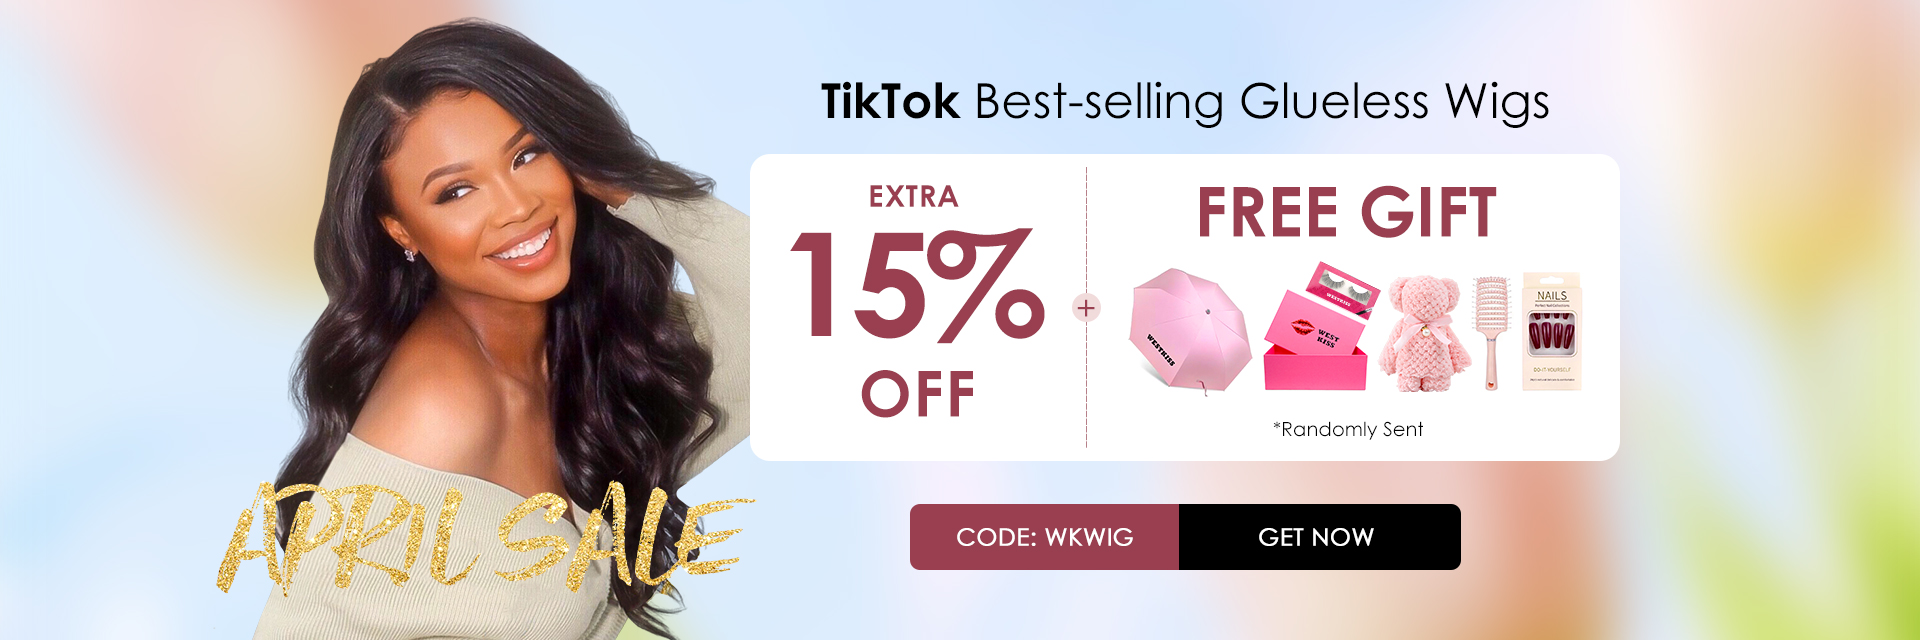 West kiss hair store offers TikTok same trendy lace wigs with the same price.